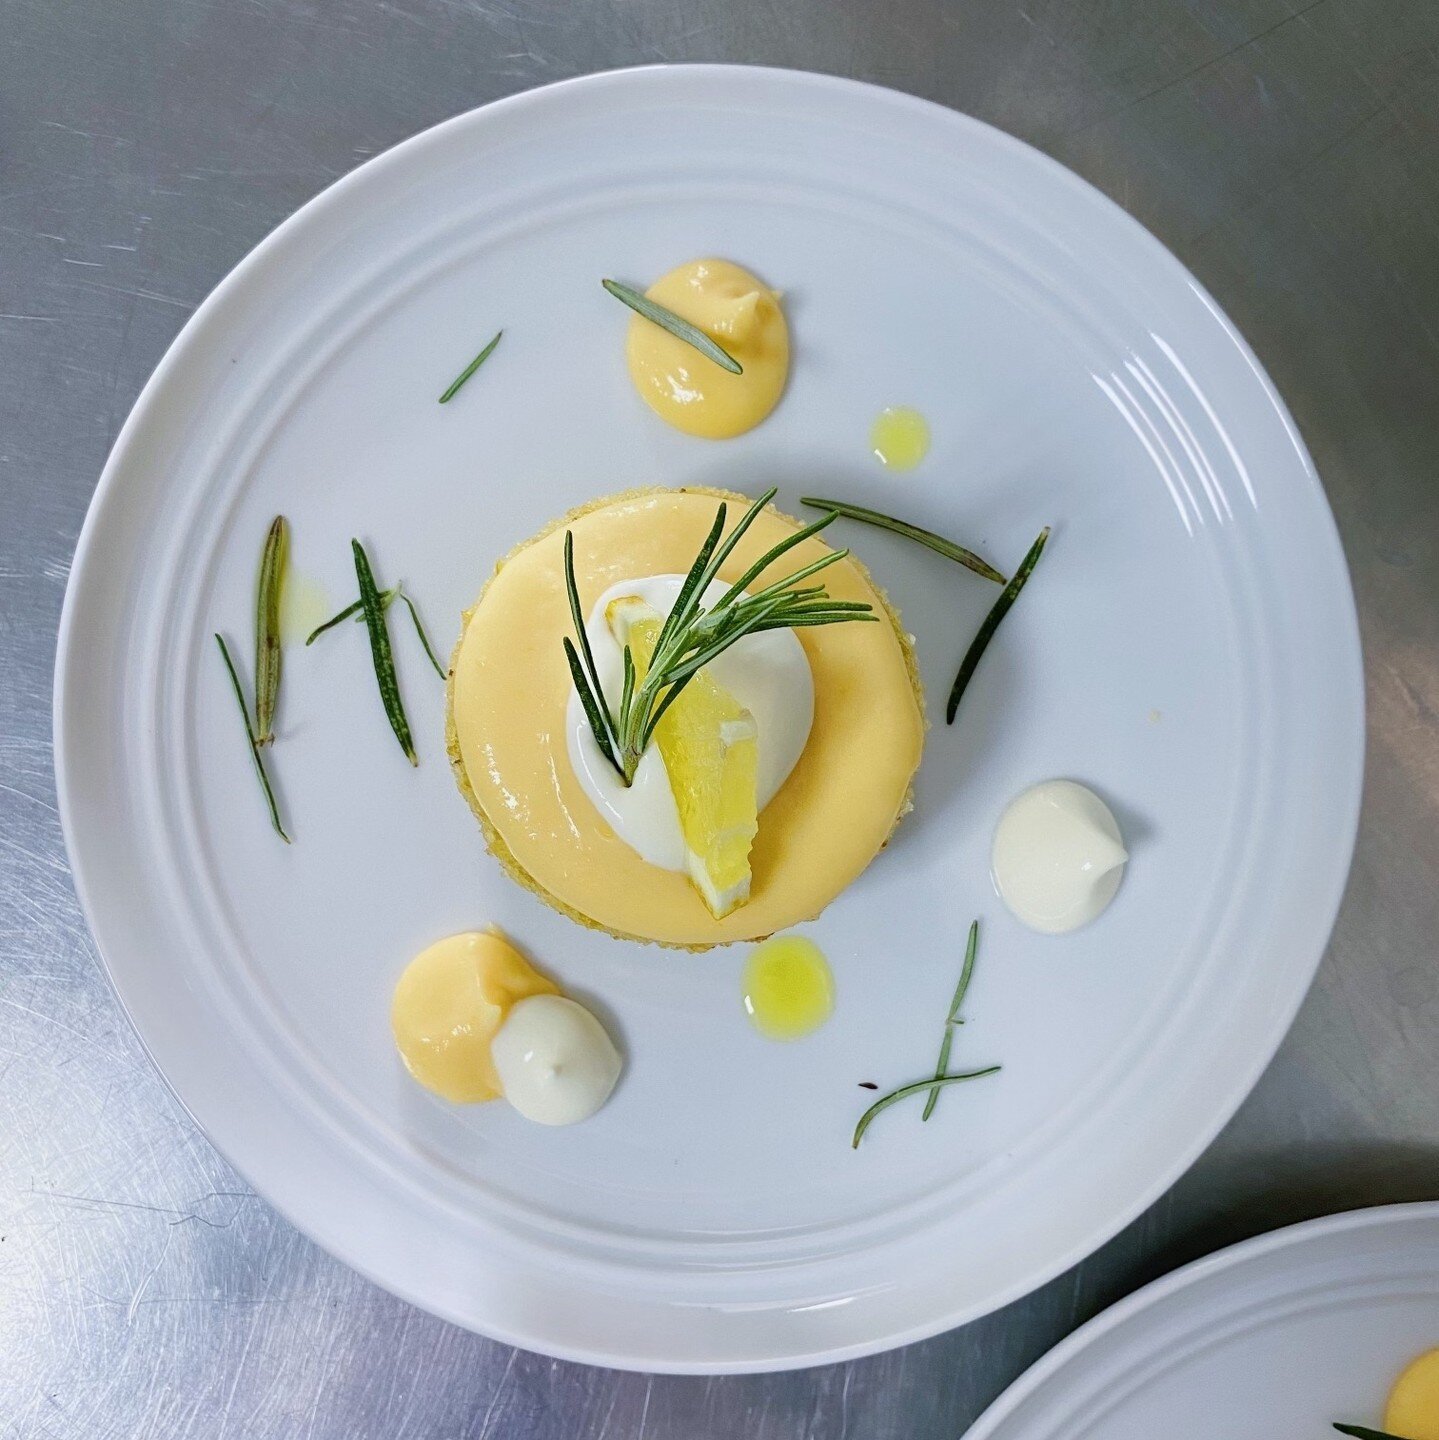 Indulge in our lemon rosemary cake with a tangy lemon curd and creamy mascarpone. A perfect balance of flavours that will leave you wanting more. #PrivateChefAlgarve #LemonRosemaryCake #DessertGoals